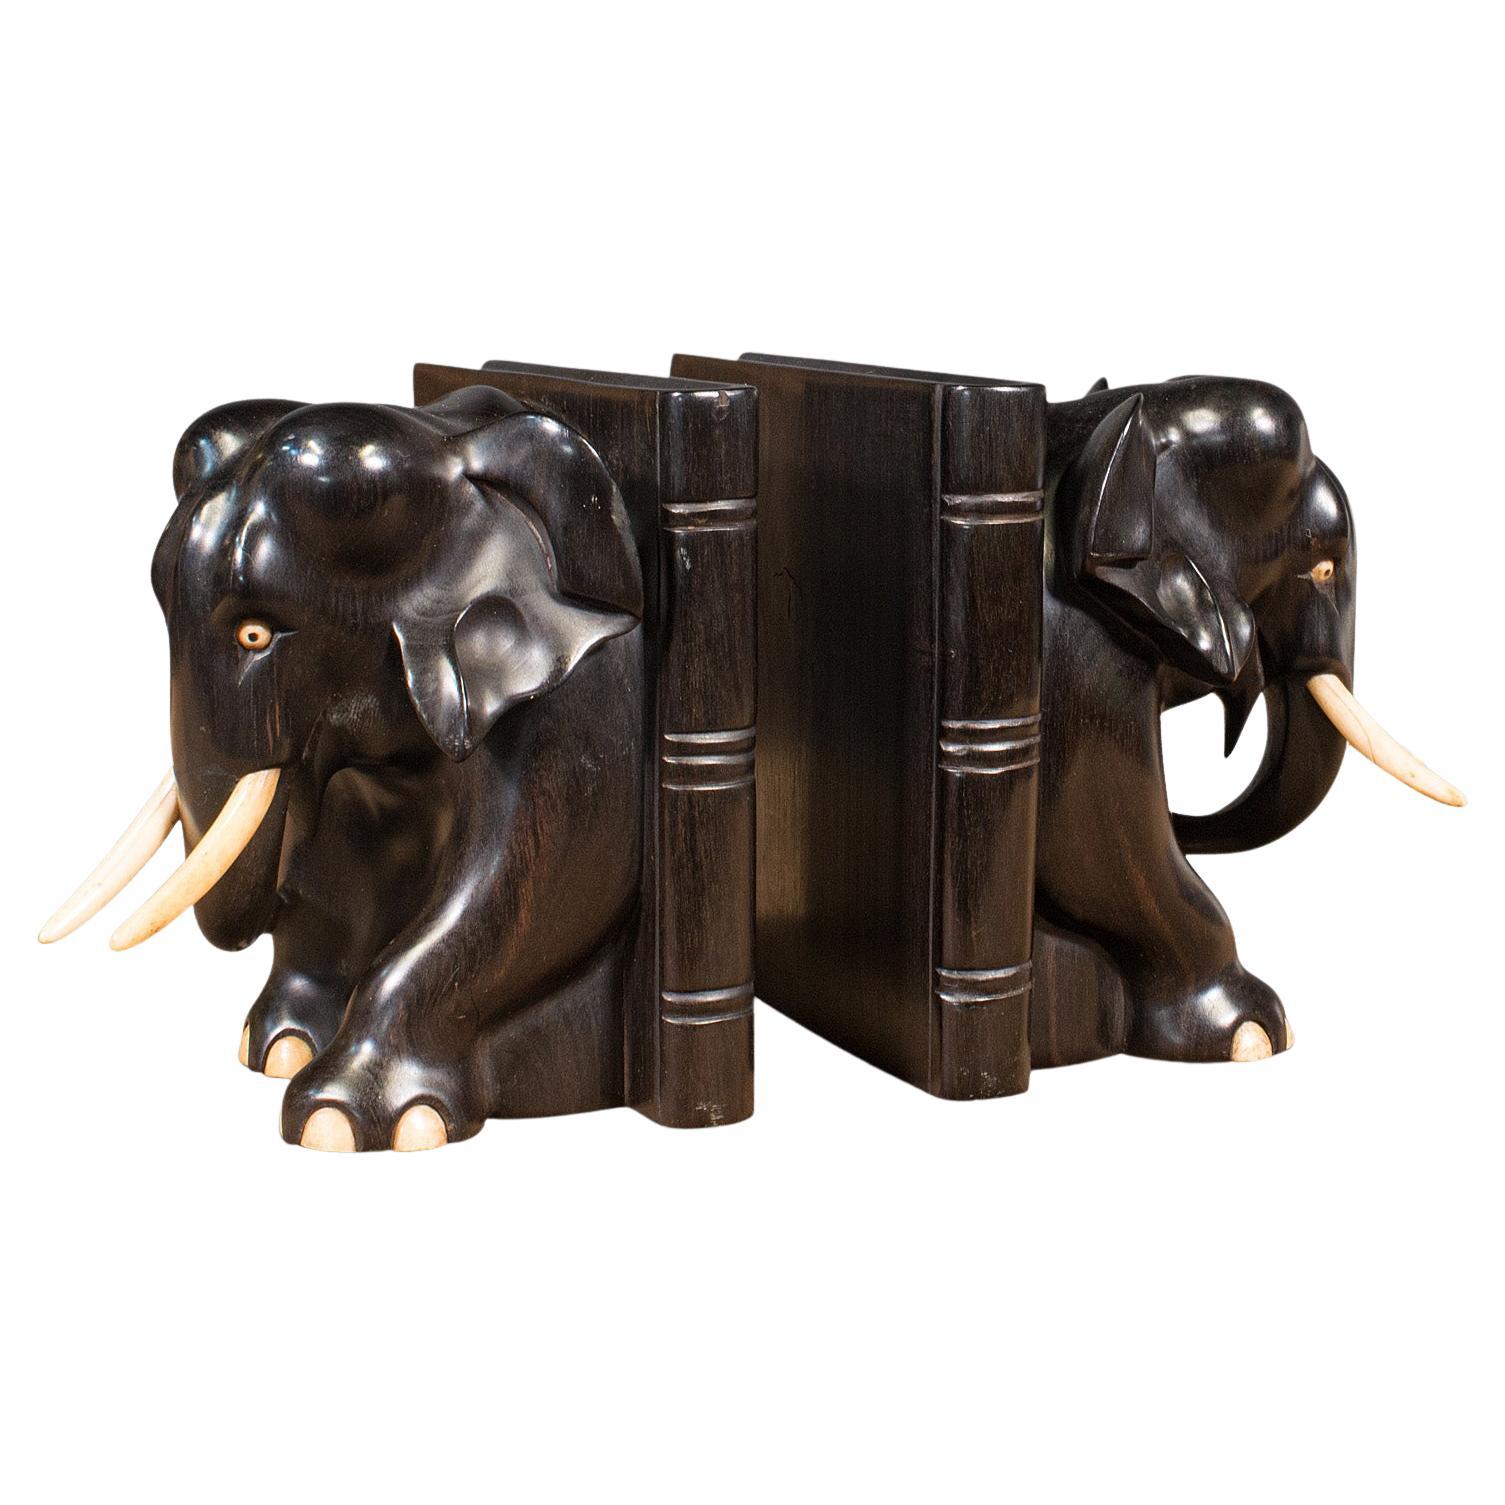 Pair of Antique Elephant Bookends, English, Ebony, Carved, Book Rest, Victorian For Sale